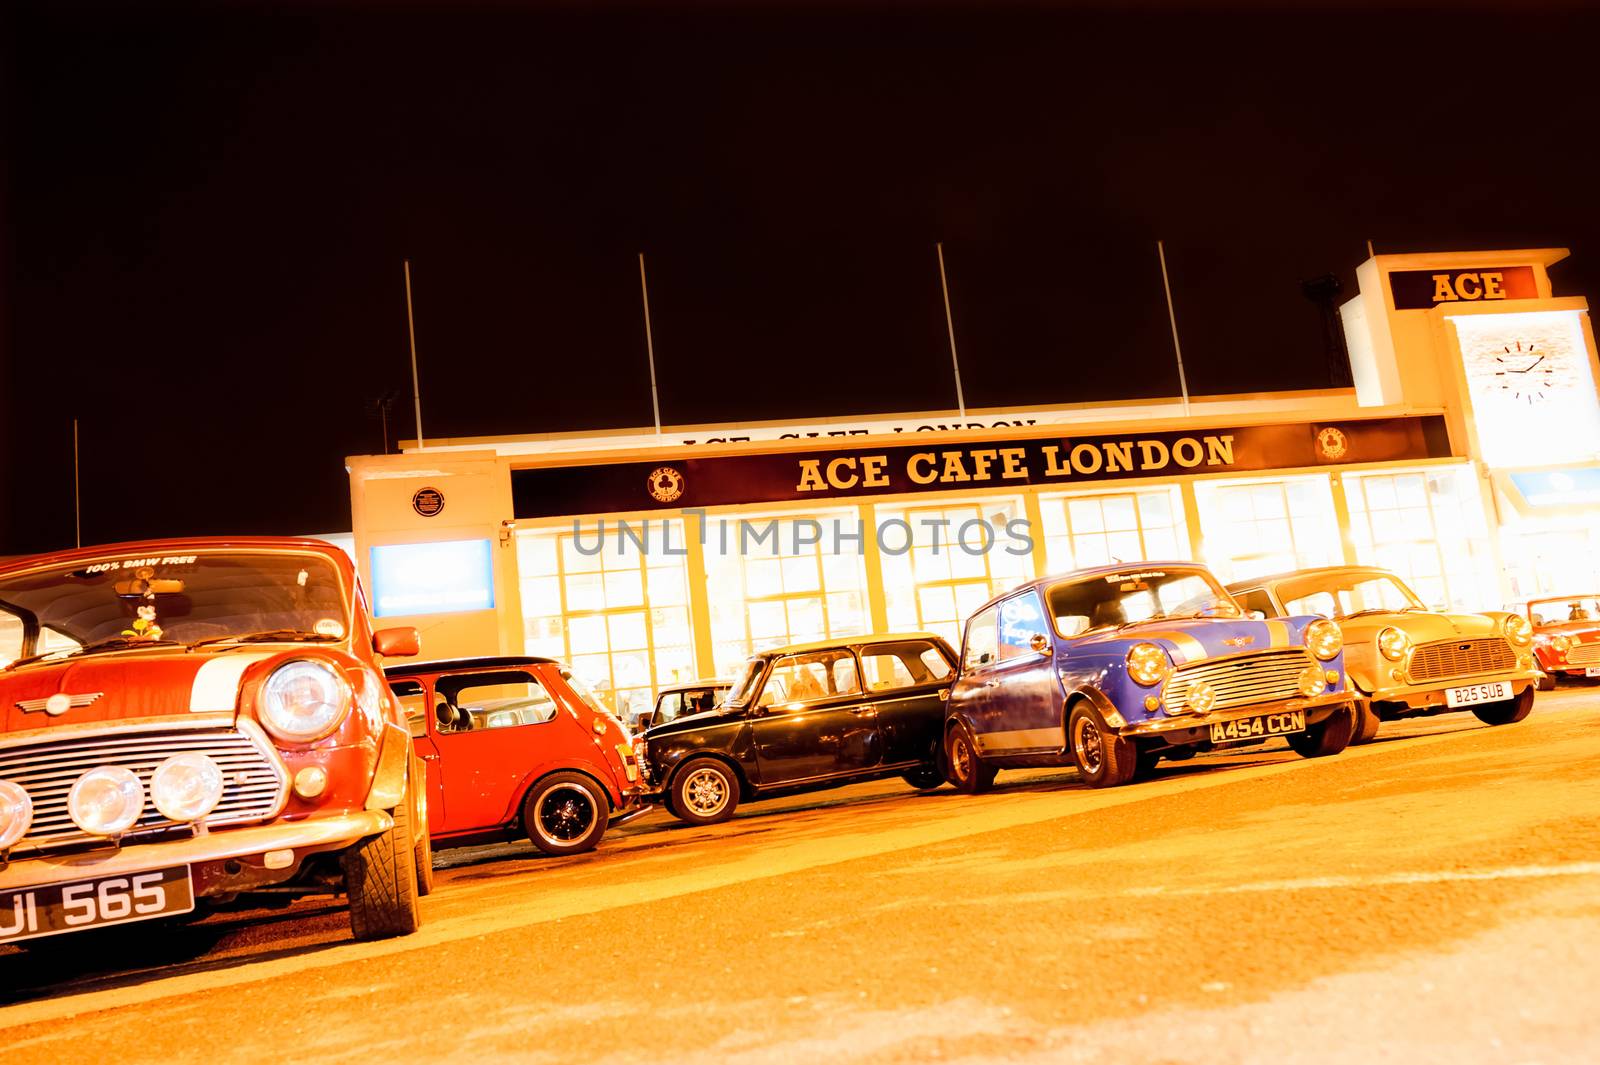 London, UK - April 4, 2013: Night exposure of classic Austin Mini automobiles parked at the landmark Ace Cafe in London